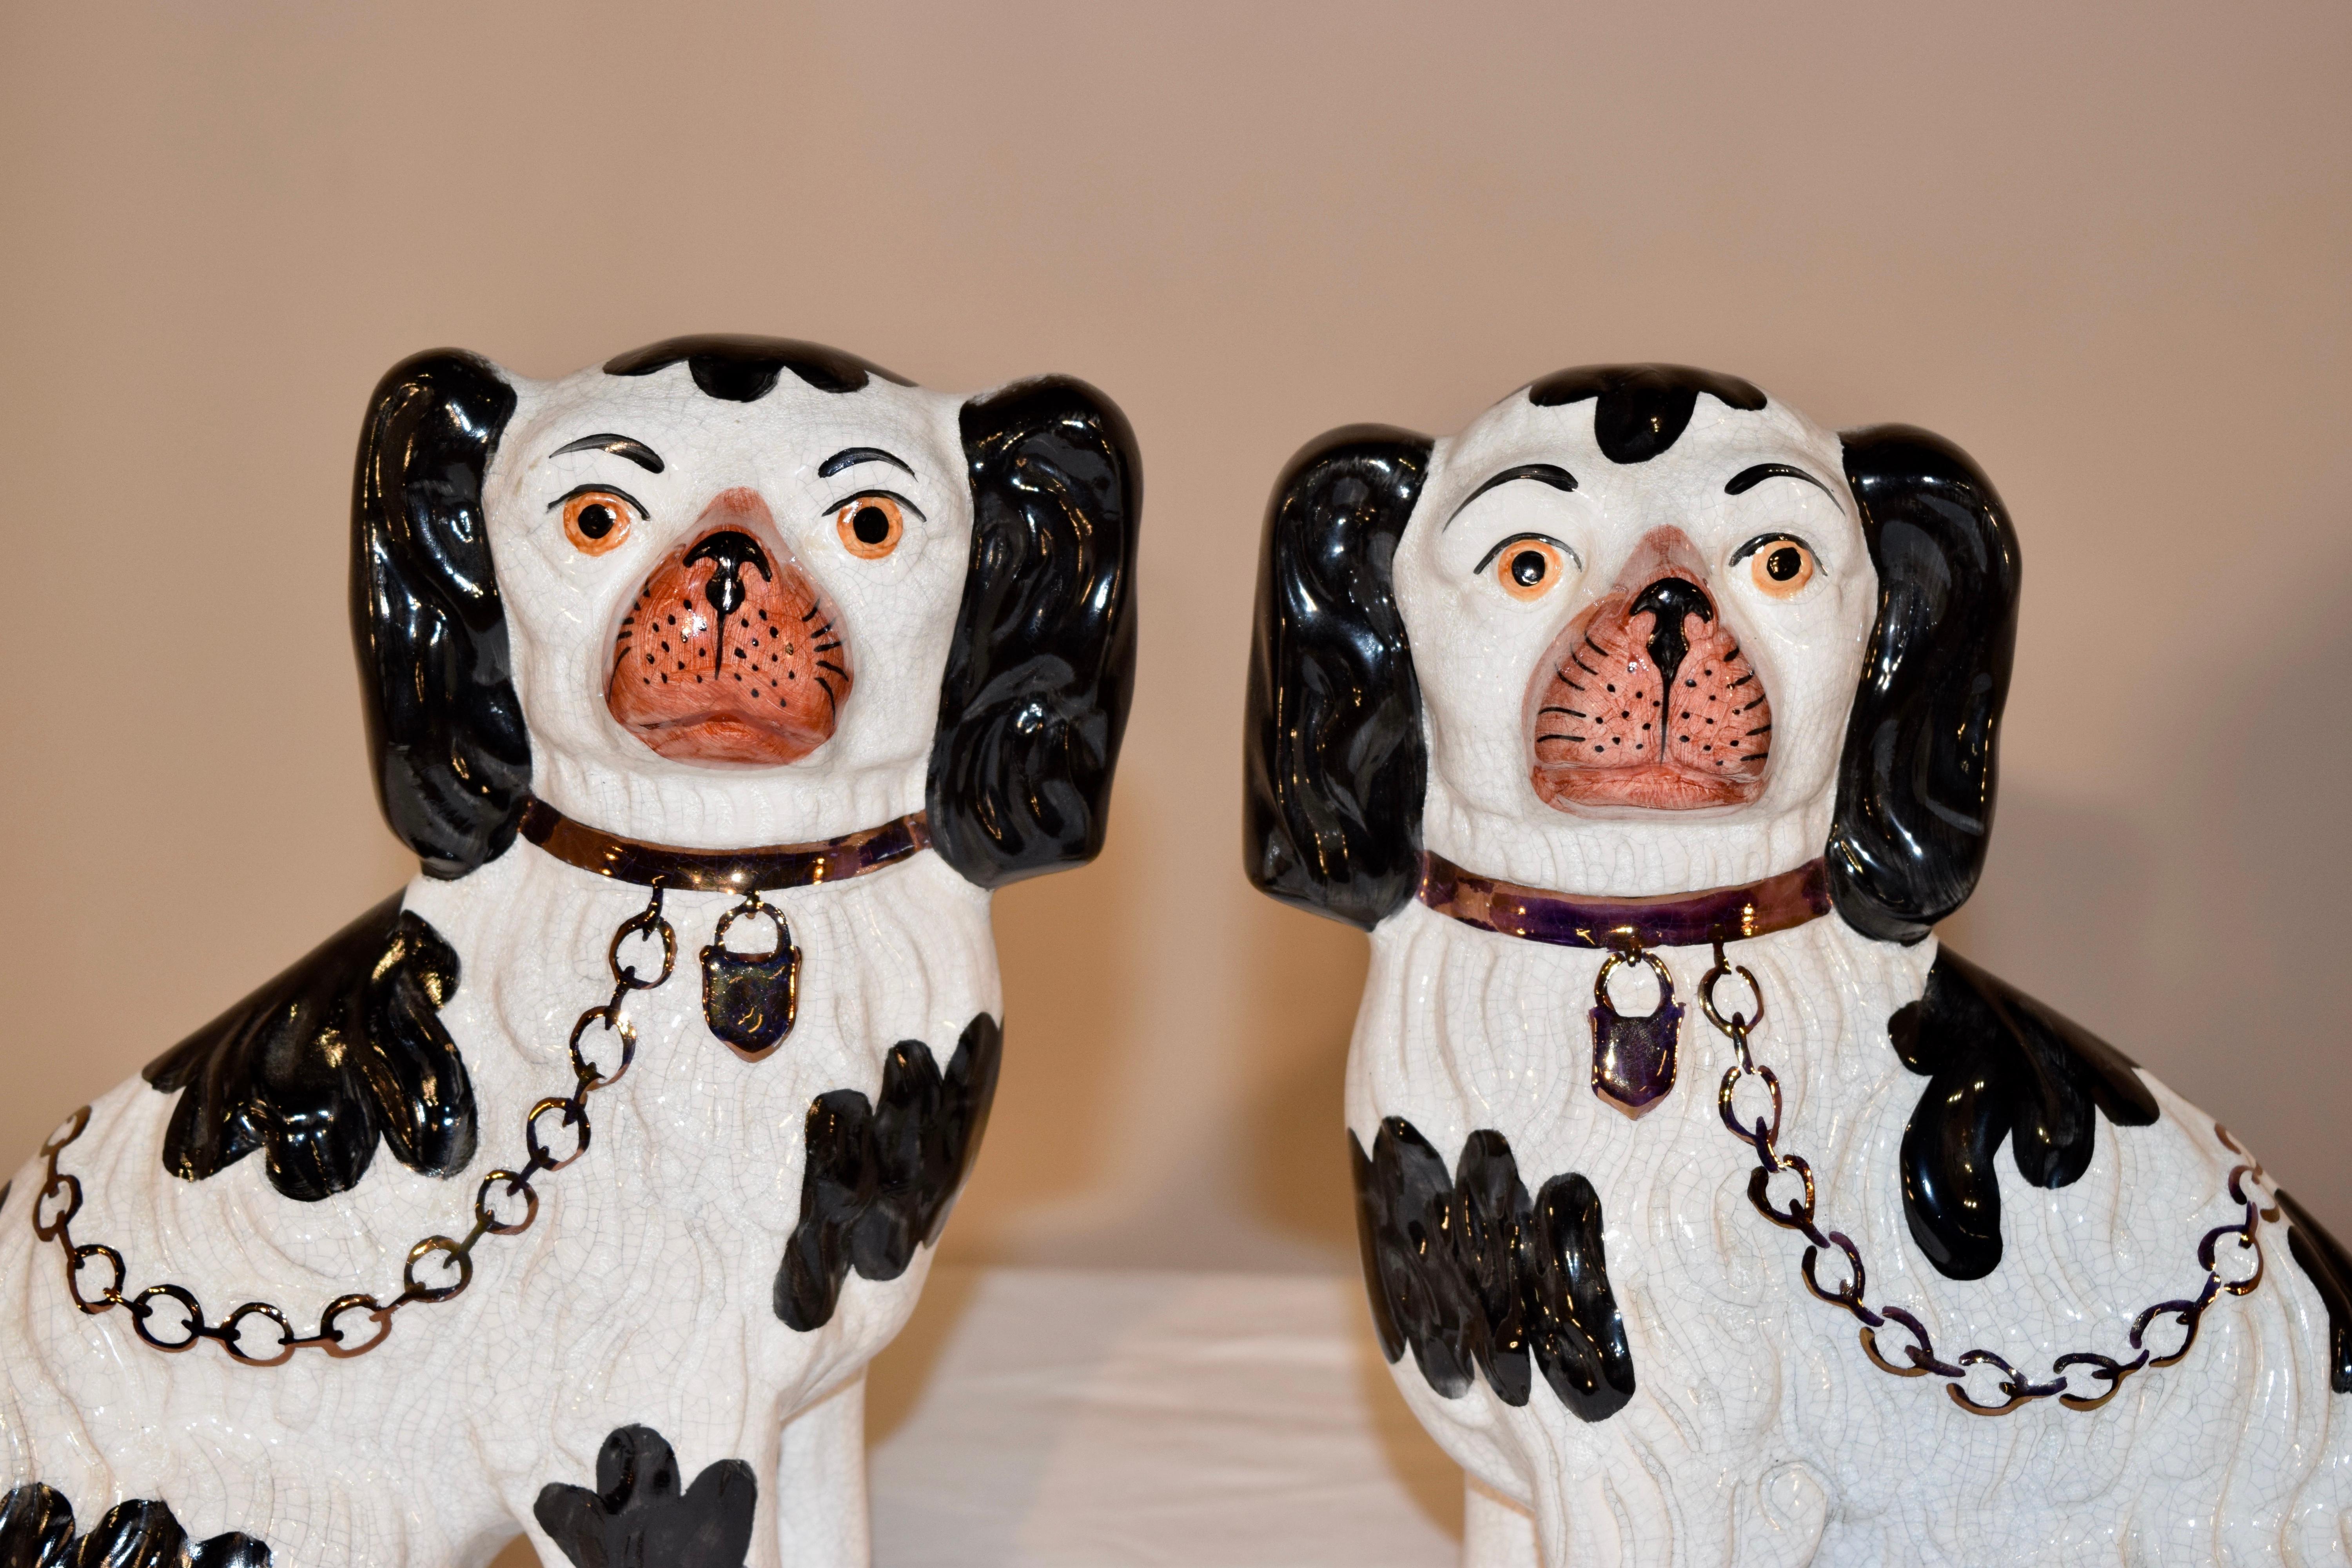 Pair of mid-20th century Staffordshire spaniels, made by and marked William Kent Ltd. The mark was used between 1944-1962. This is a wonderful pair of black and white spaniels with separated front legs. Great condition.